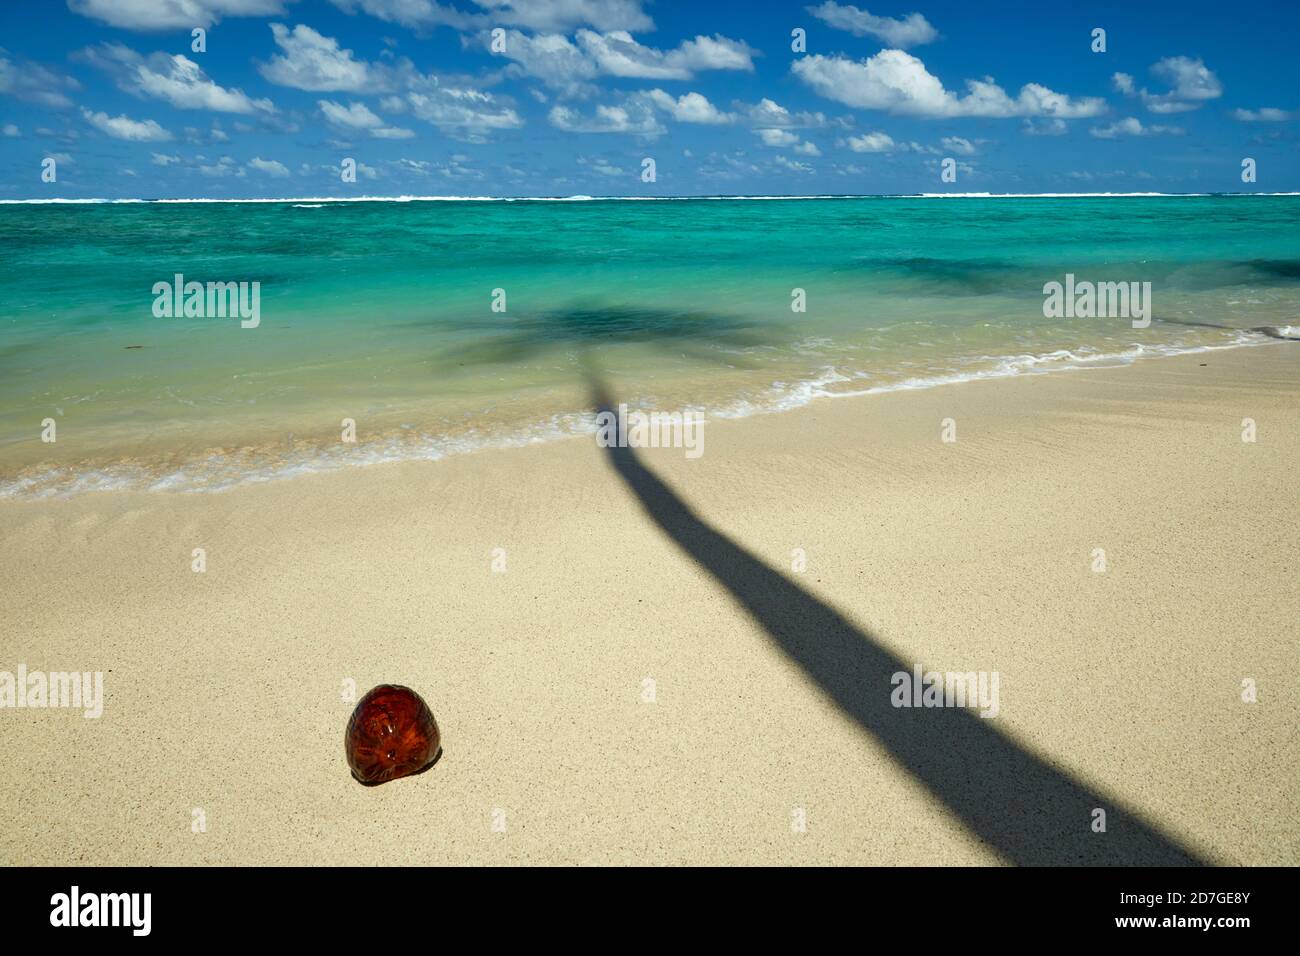 Coconut and palm shadow on beach and Pacific Ocean, Rarotonga, Cook Islands, South Pacific Stock Photo